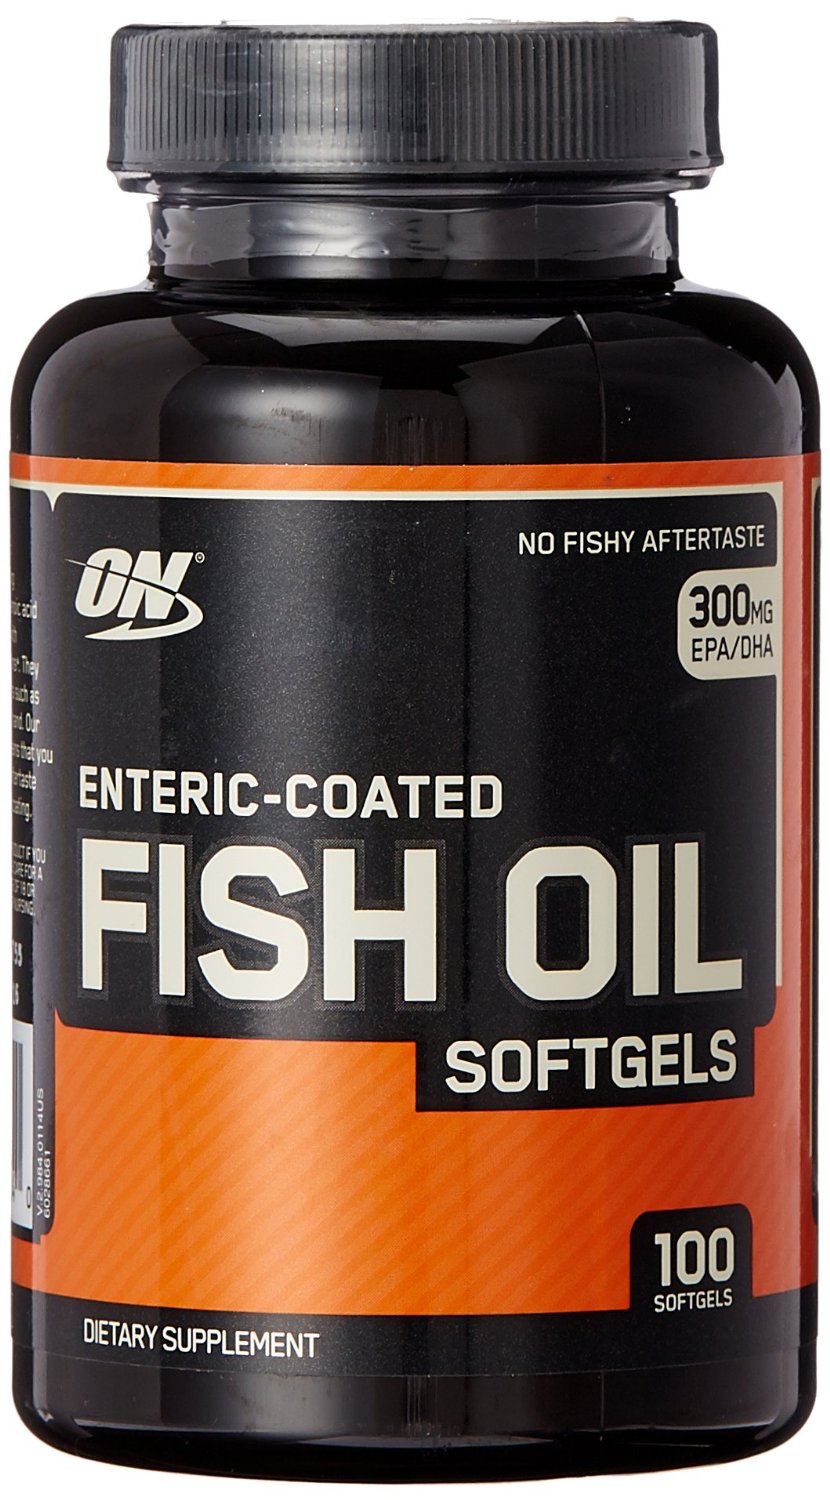 Top 10 Best Omega 3 capsules (Fish Oil) in India - Indian ...